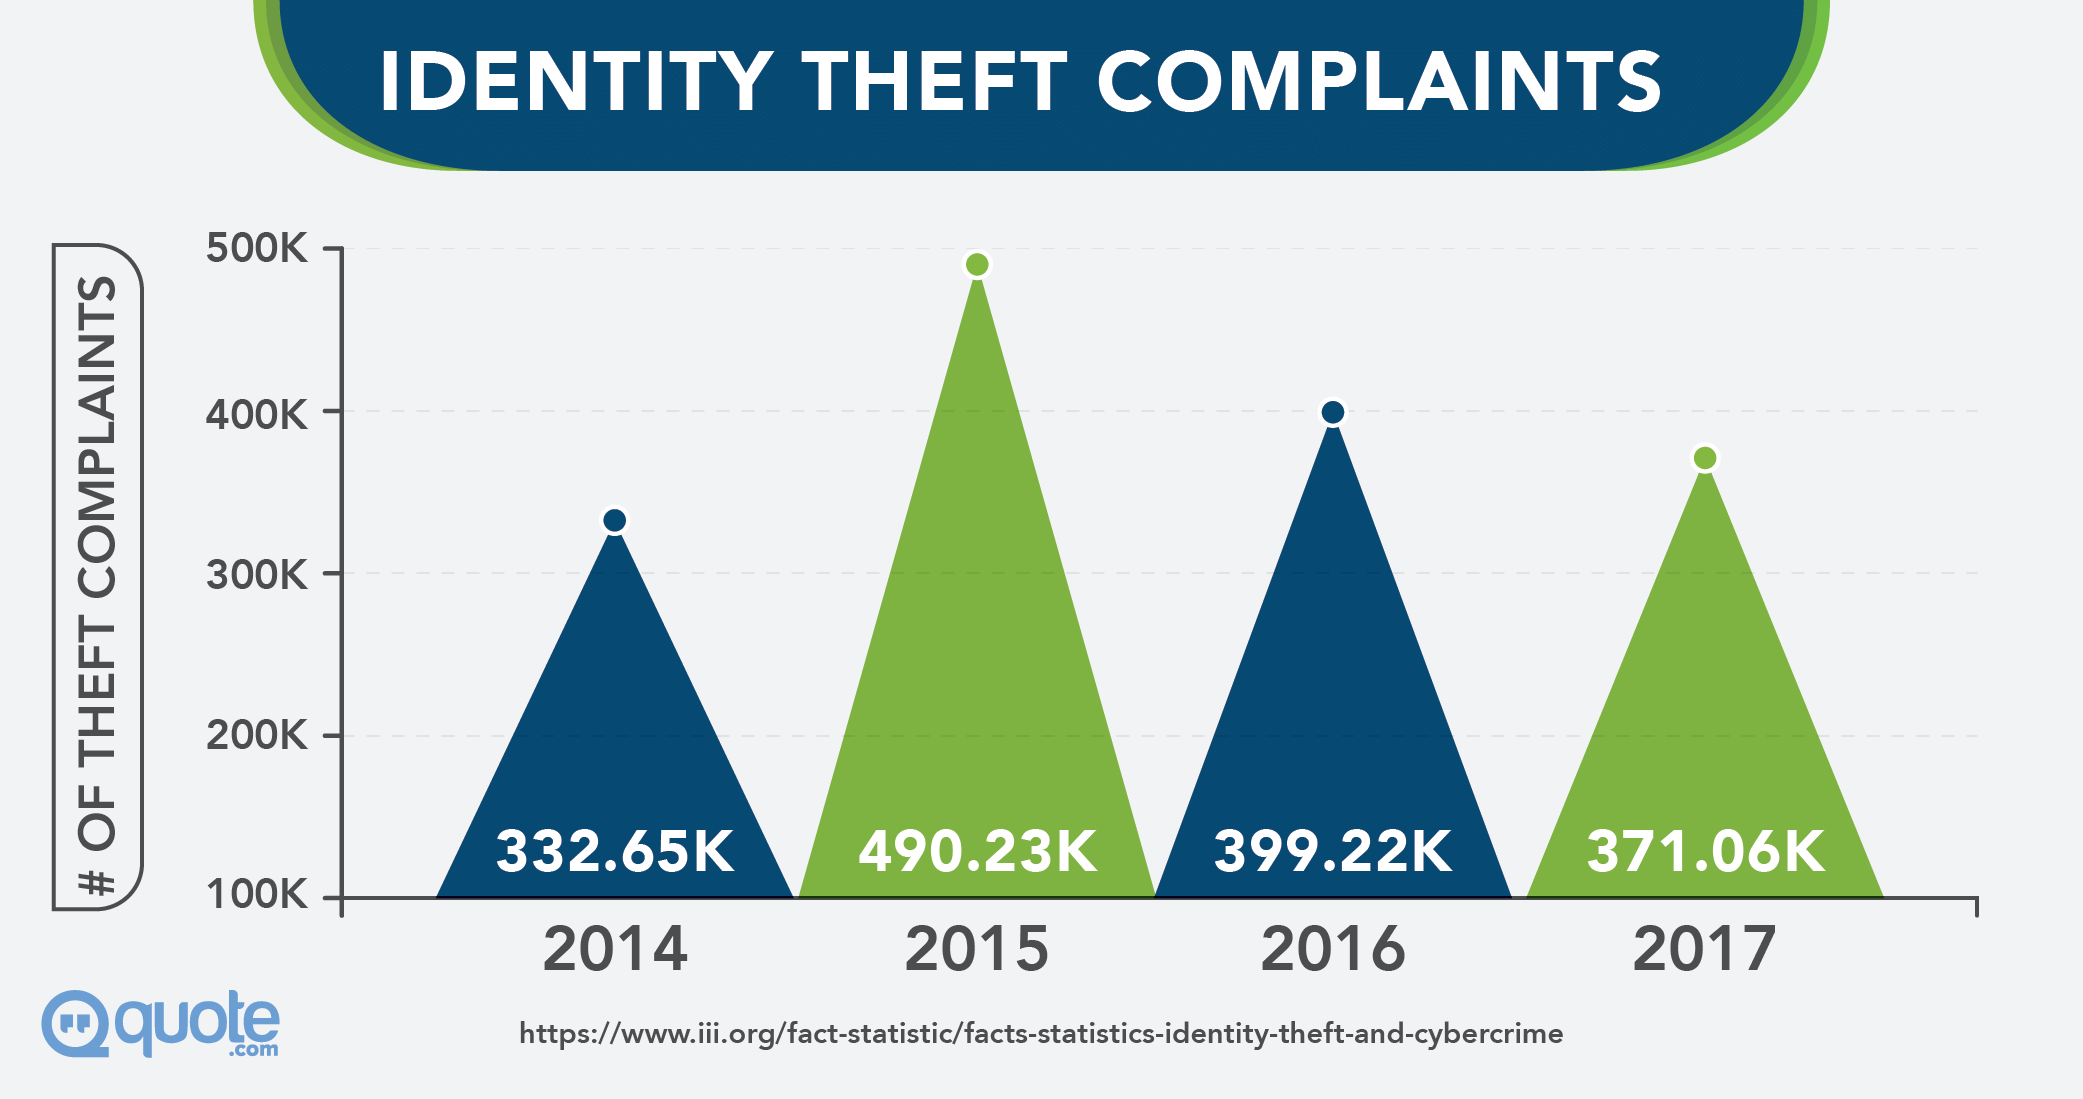 Identity Theft Complaints from 2014-2017